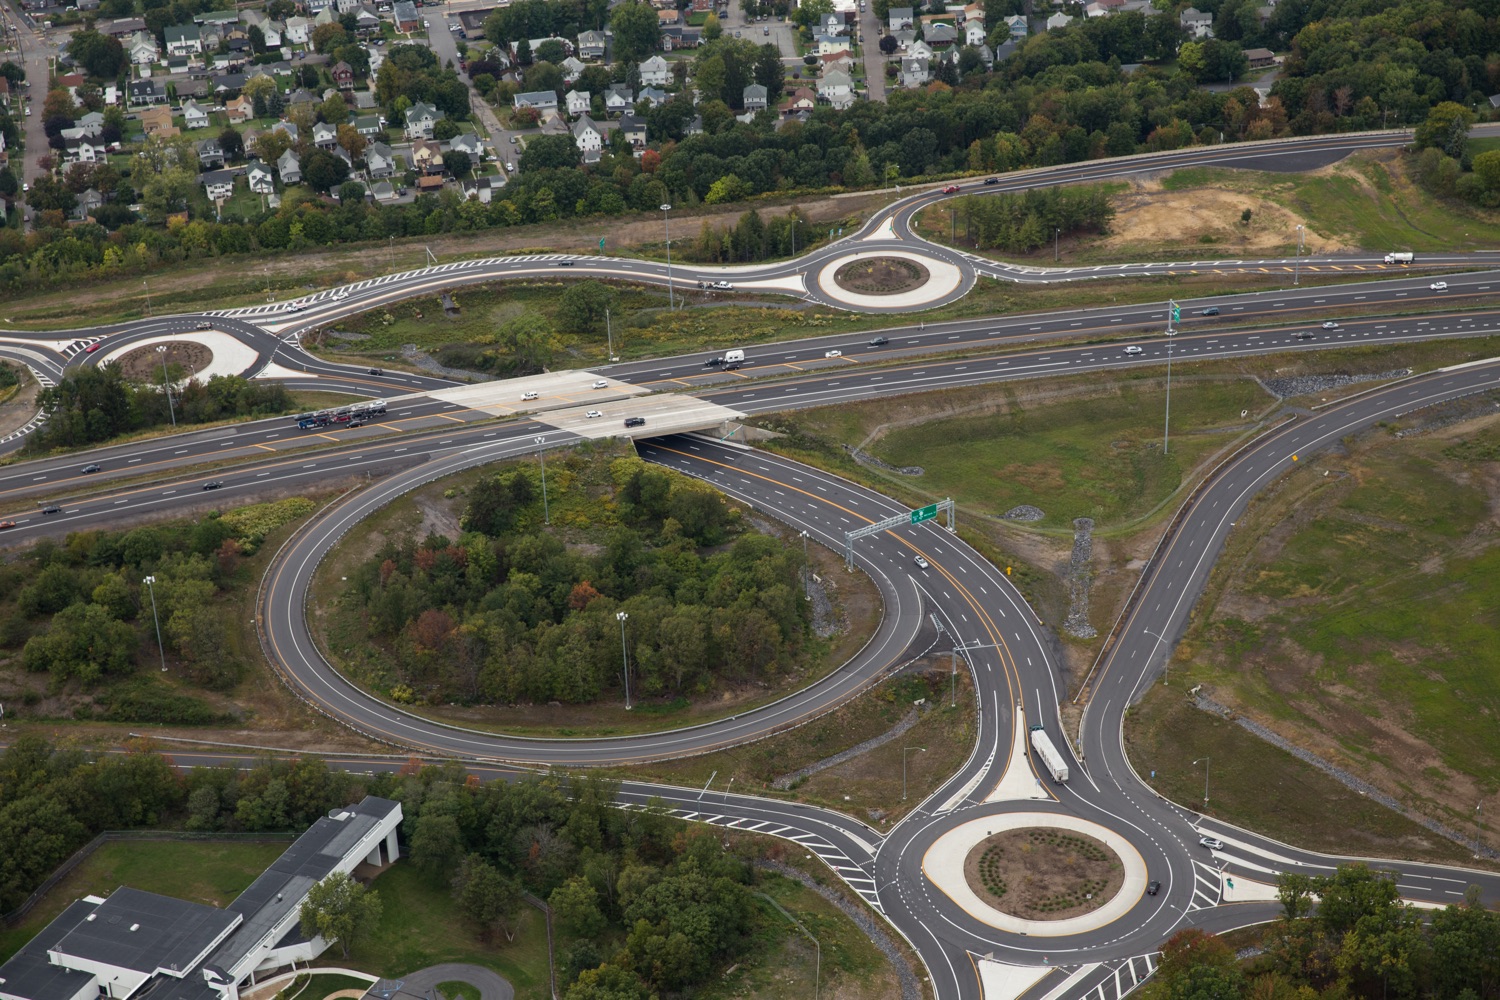 I-81 Exit 178, Airport Road interchange (three roundabouts)<br><a href="https://filesource.amperwave.net/commonwealthofpa/photo/22209_dot_roundabout_photo_2.jpg" target="_blank">⇣ Download Photo</a>